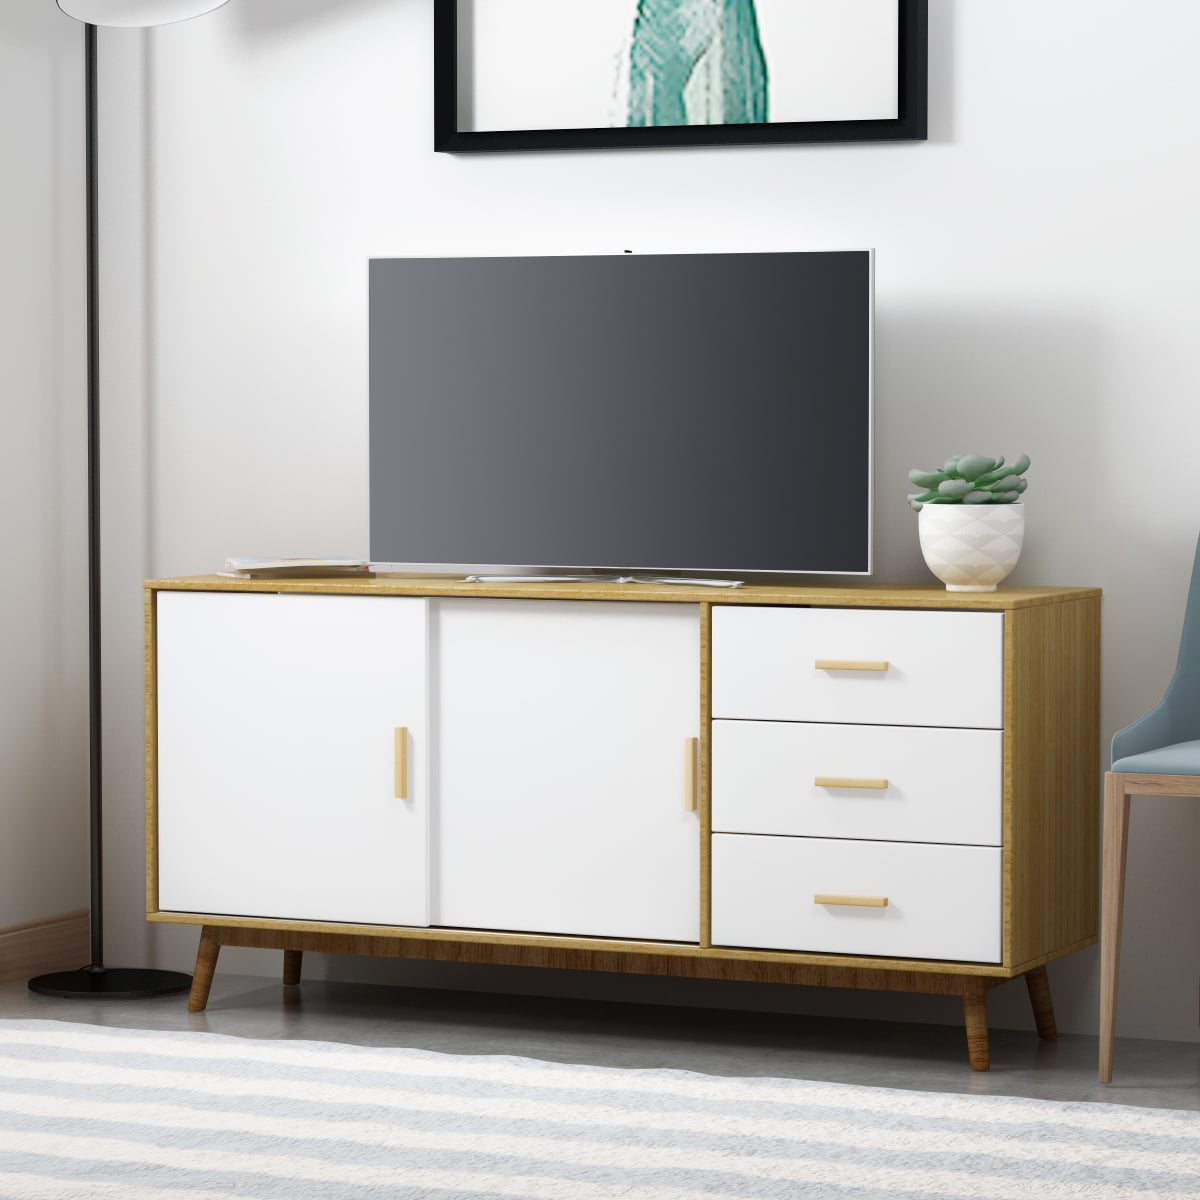 Details about   TV Unit Entertainment Display Storage Stand Living Room Furniture Center Console 